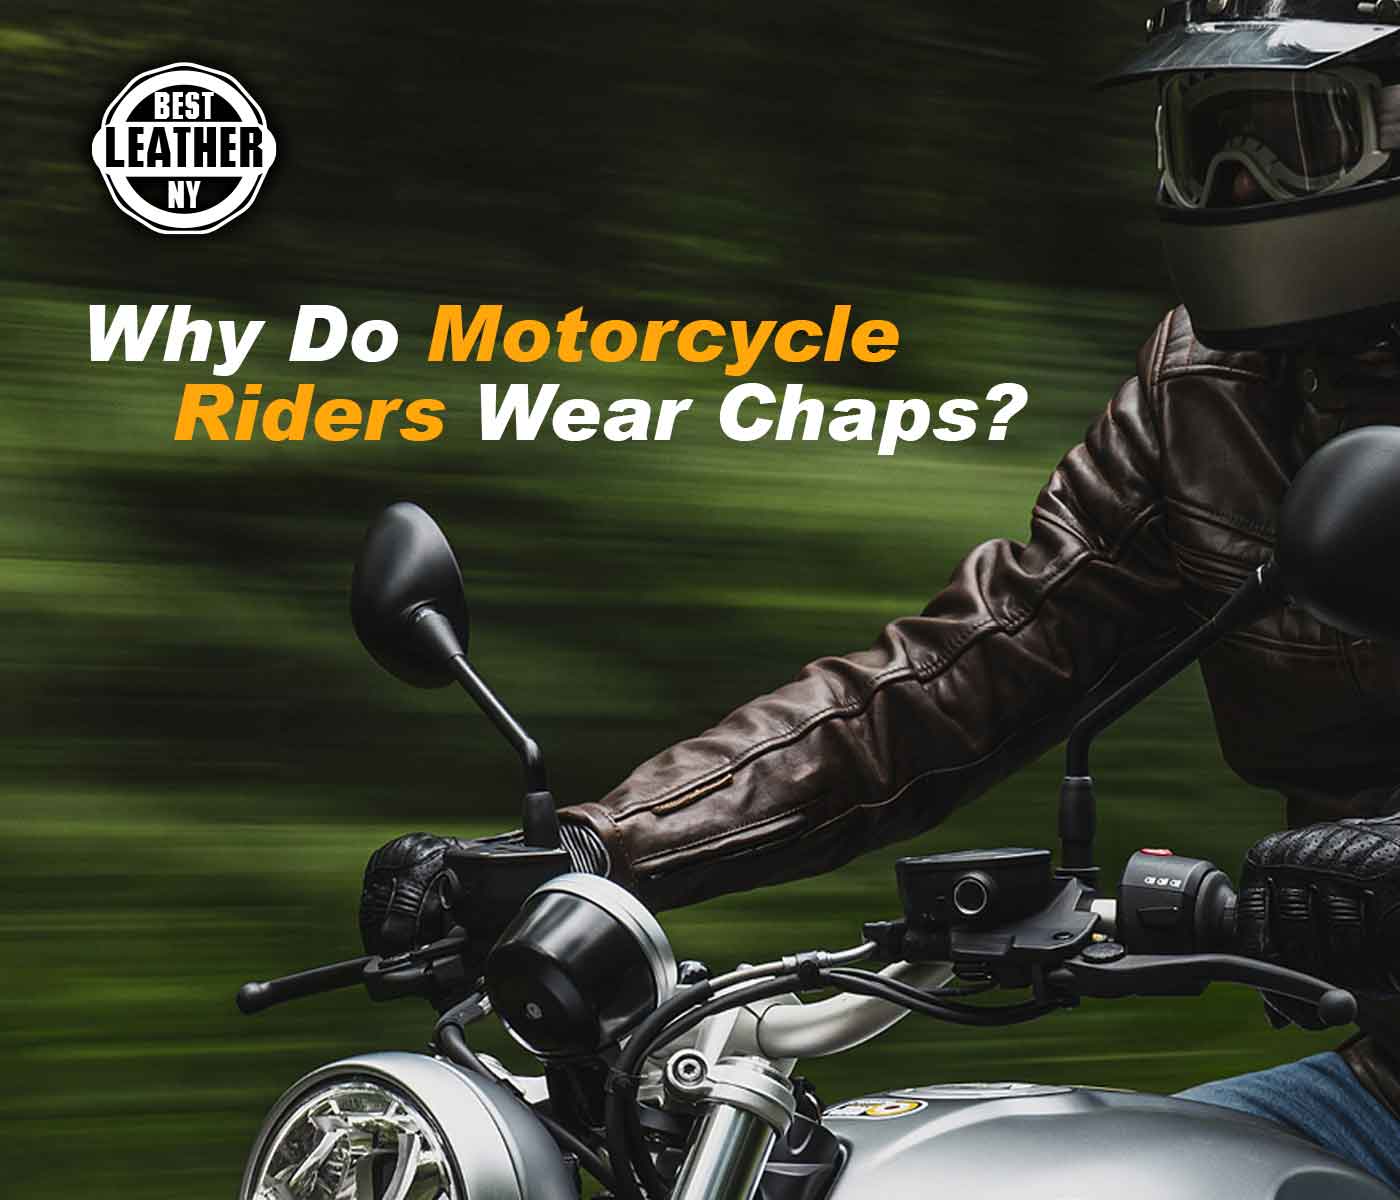 Why Do Motorcycle Riders Wear Chaps?